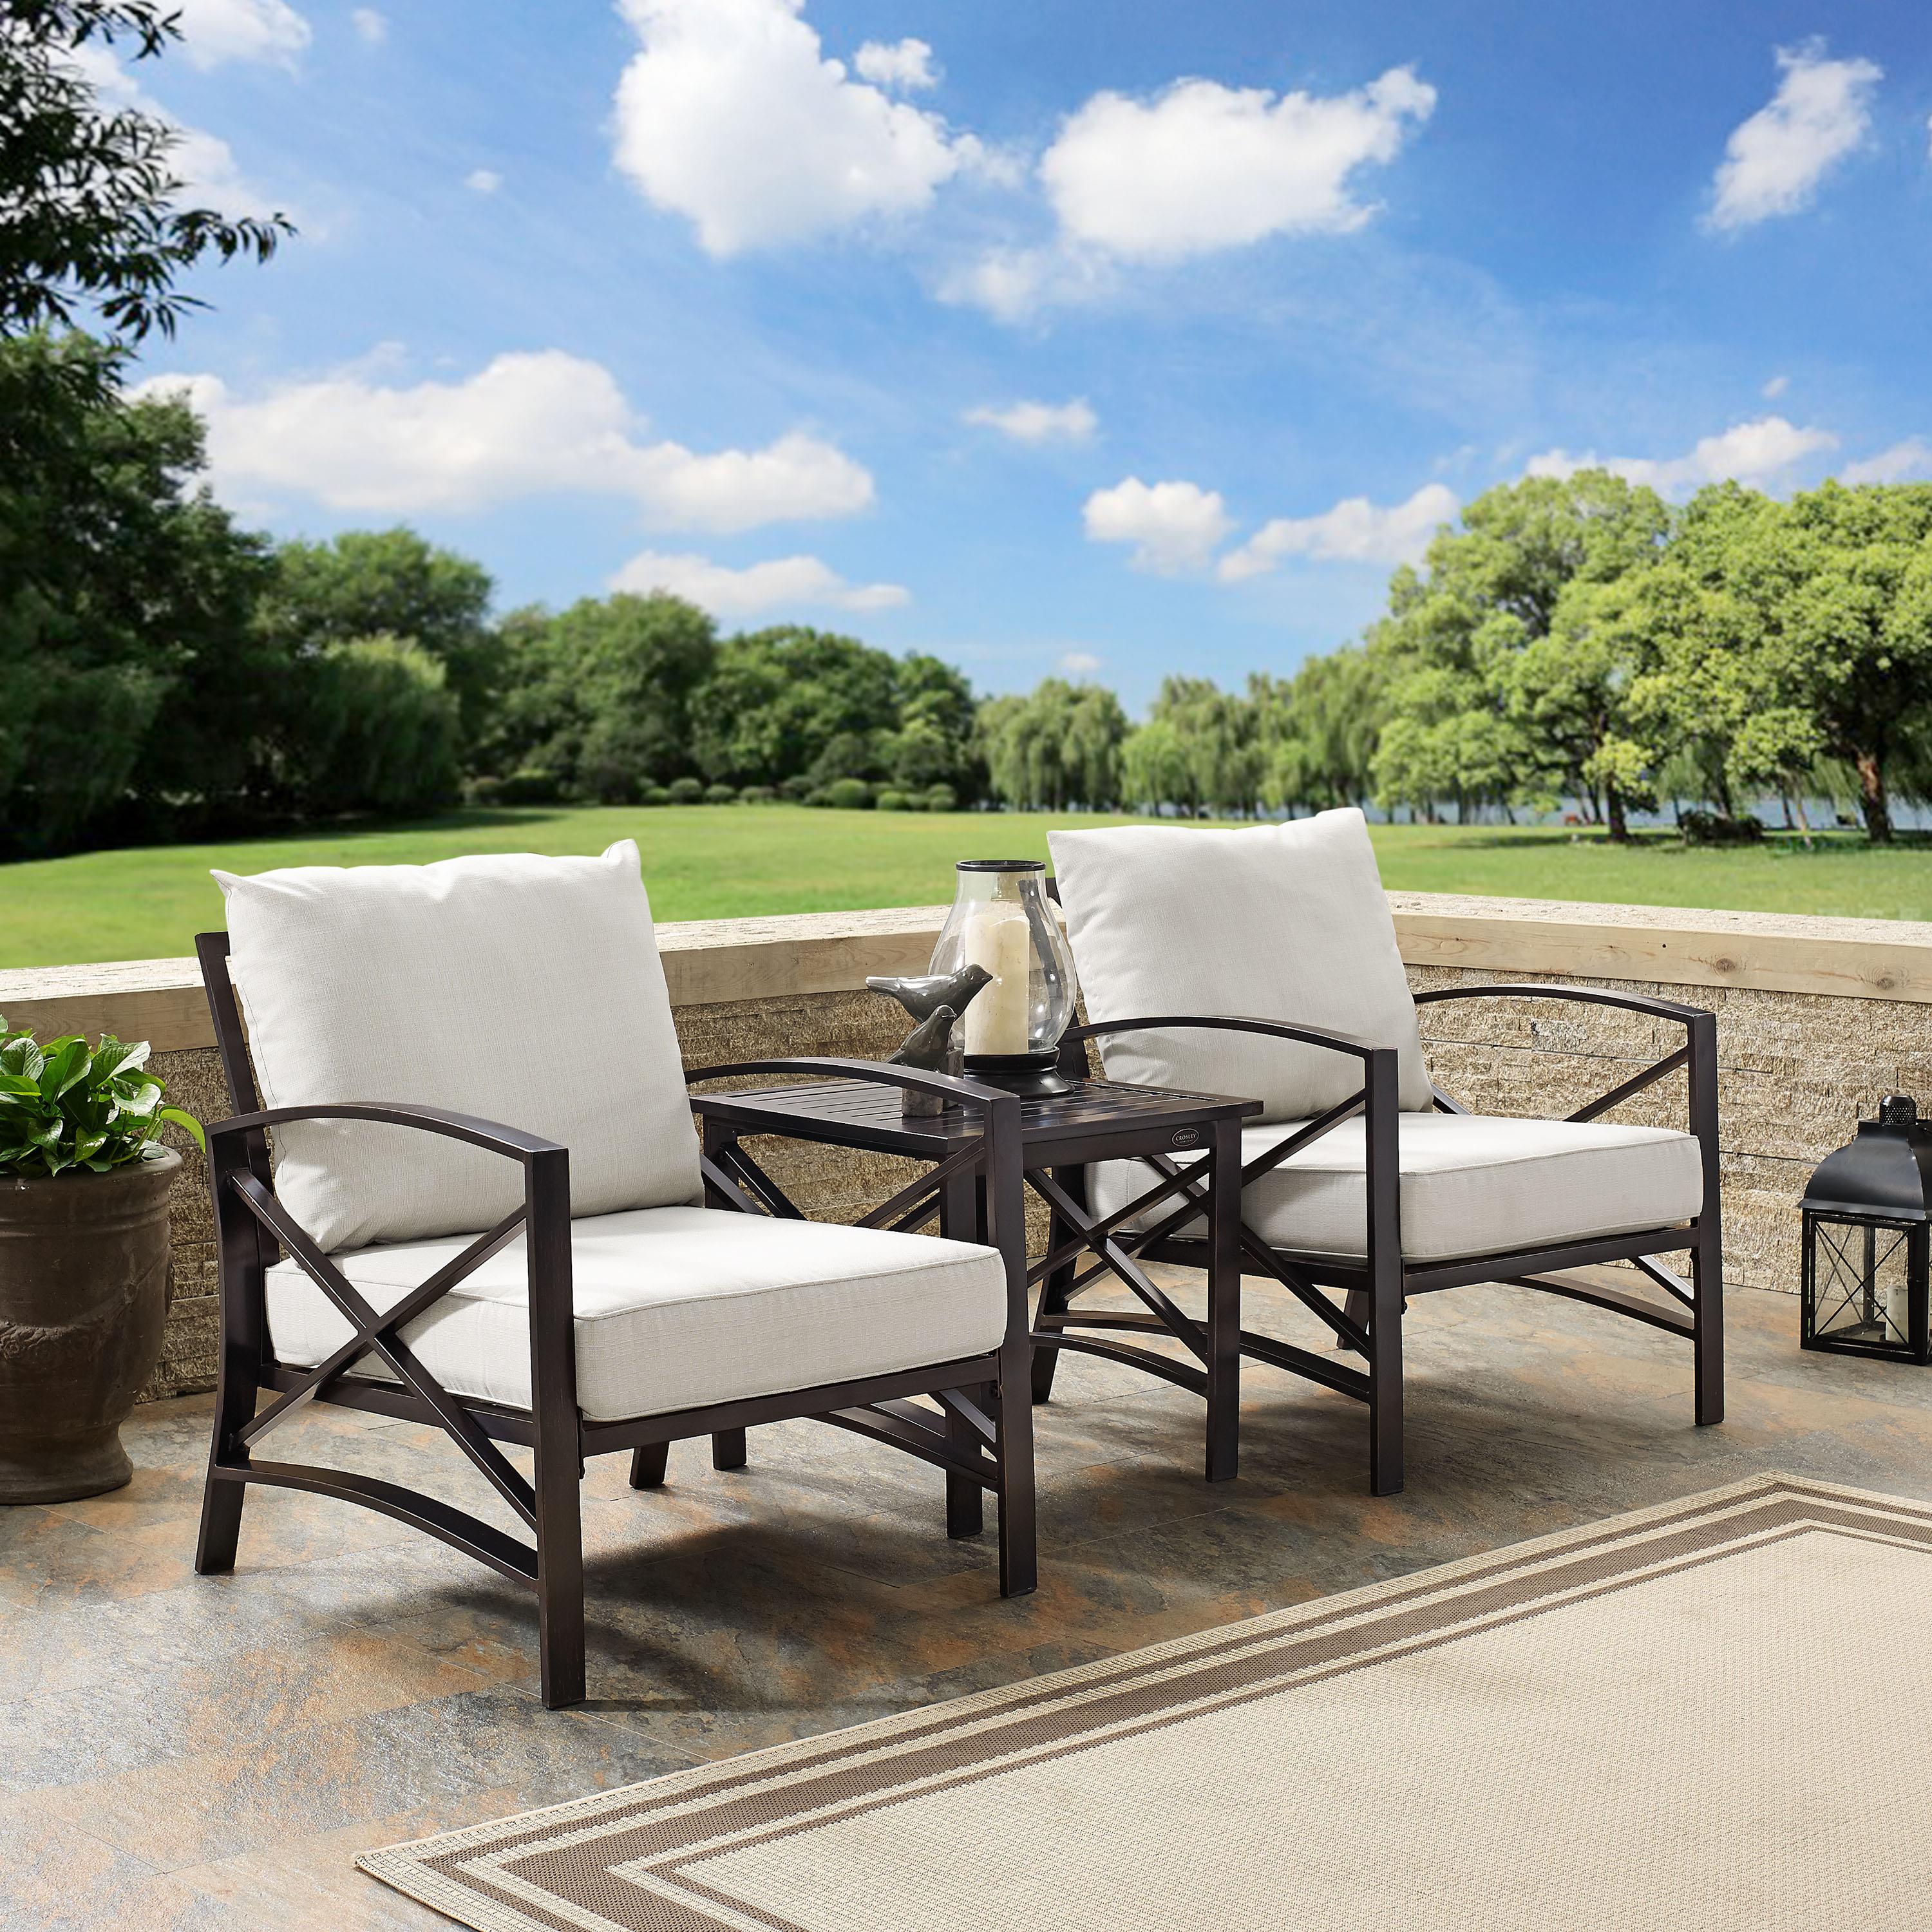 Crosley Furniture Kaplan 3 Pc Outdoor Seating Set With Oatmeal Cushion - Two Chairs, Side Table - image 2 of 8